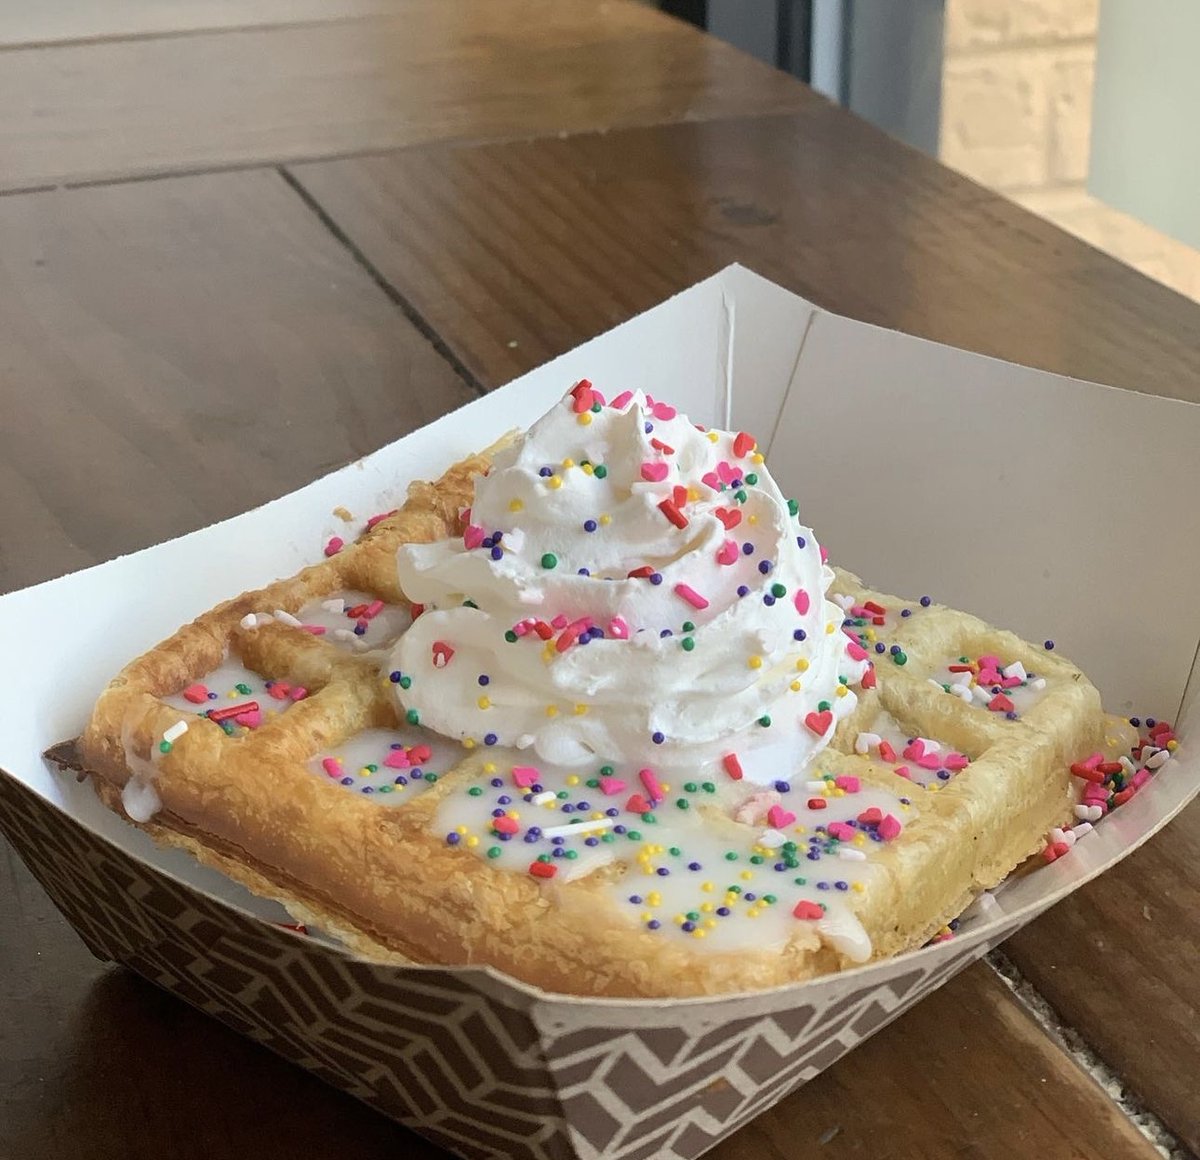 To celebrate their anniversary, @ironpaffles has these delicious specials today! $13 lobster rolls, chicken and paffles cupcakes and a vegan cookie dough filled paffle... WOW😍 Happy Anniversary, @ironpaffles!✨️🎉